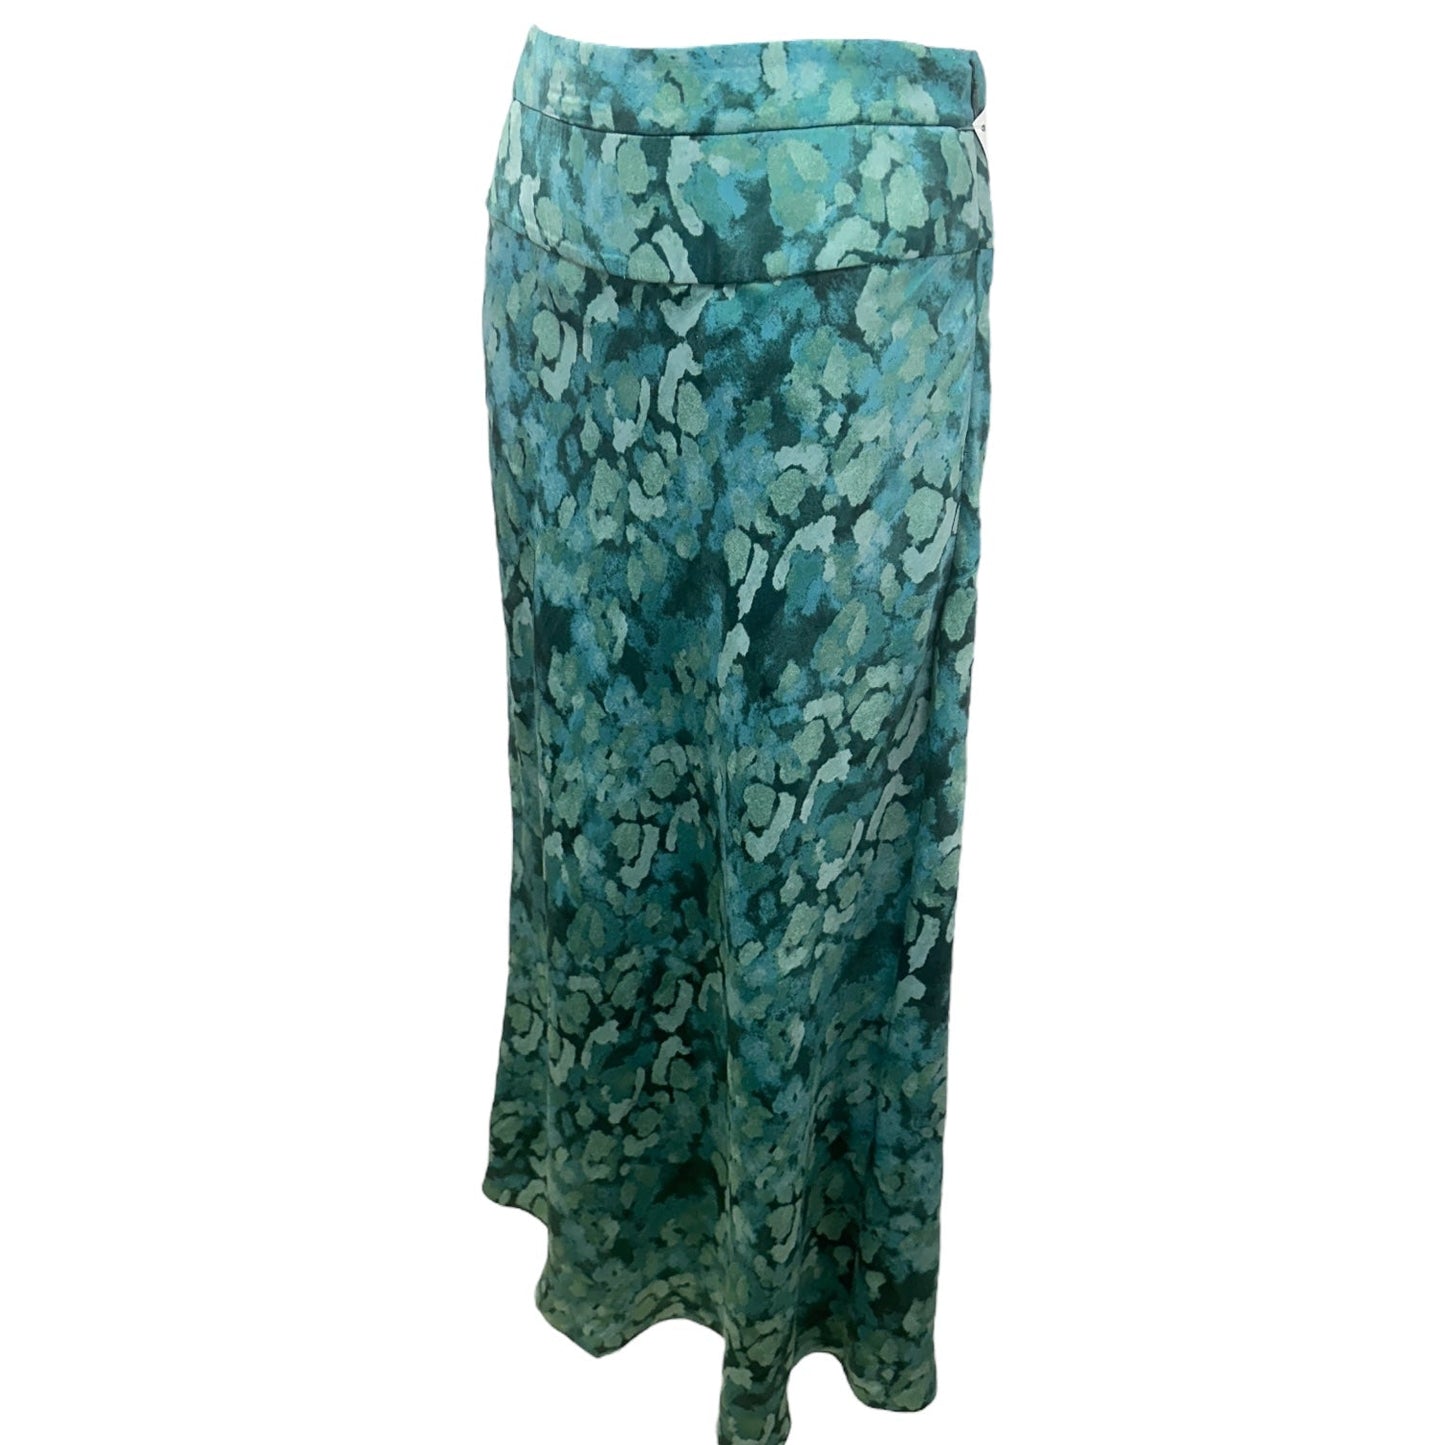 Blue & Green Skirt Maxi Free People, Size 0